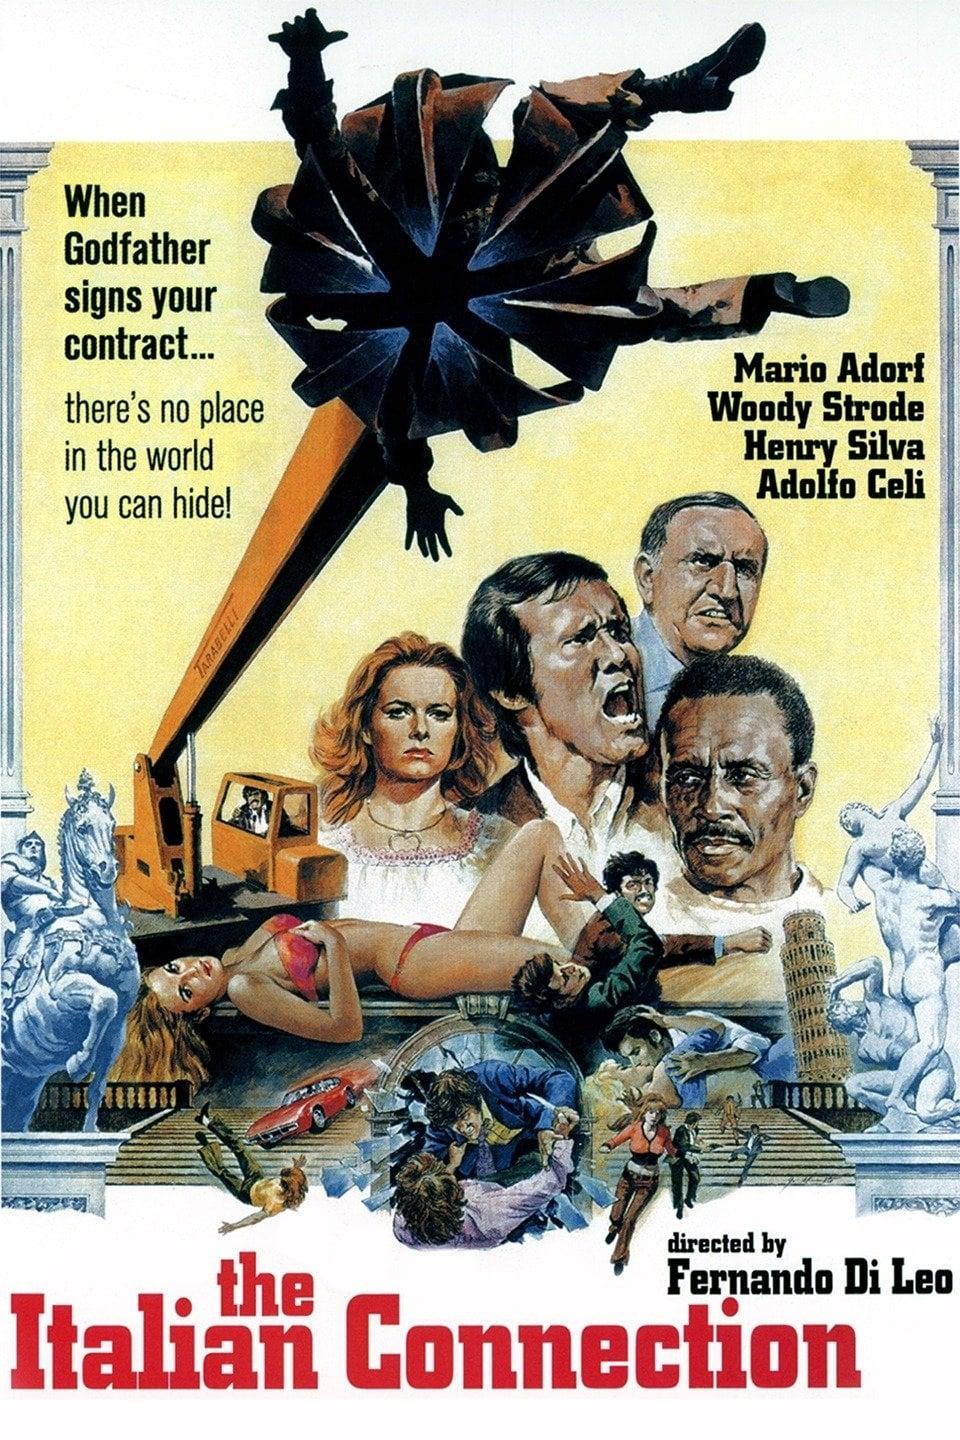 The Italian Connection poster